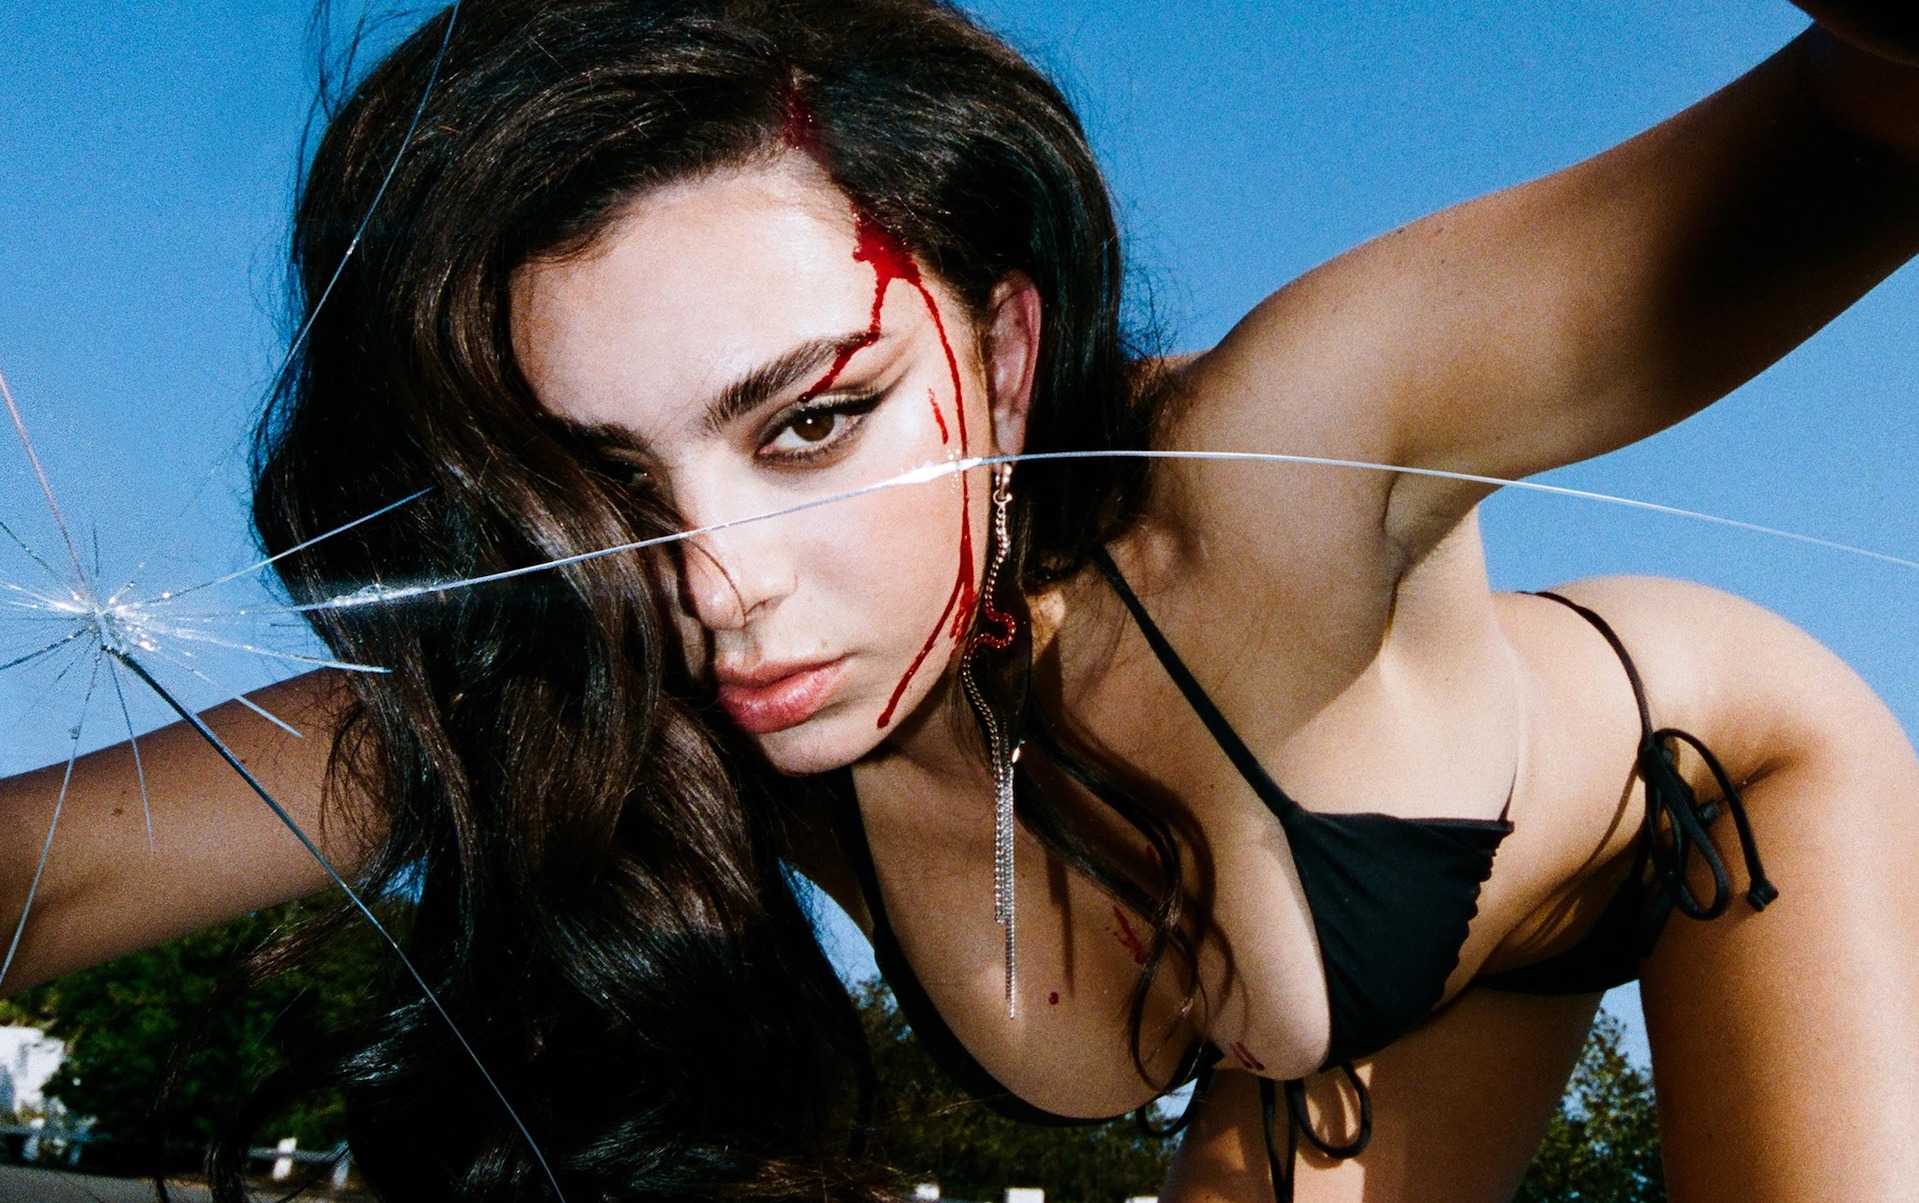 Review: Charli XCX release is everything but a crash